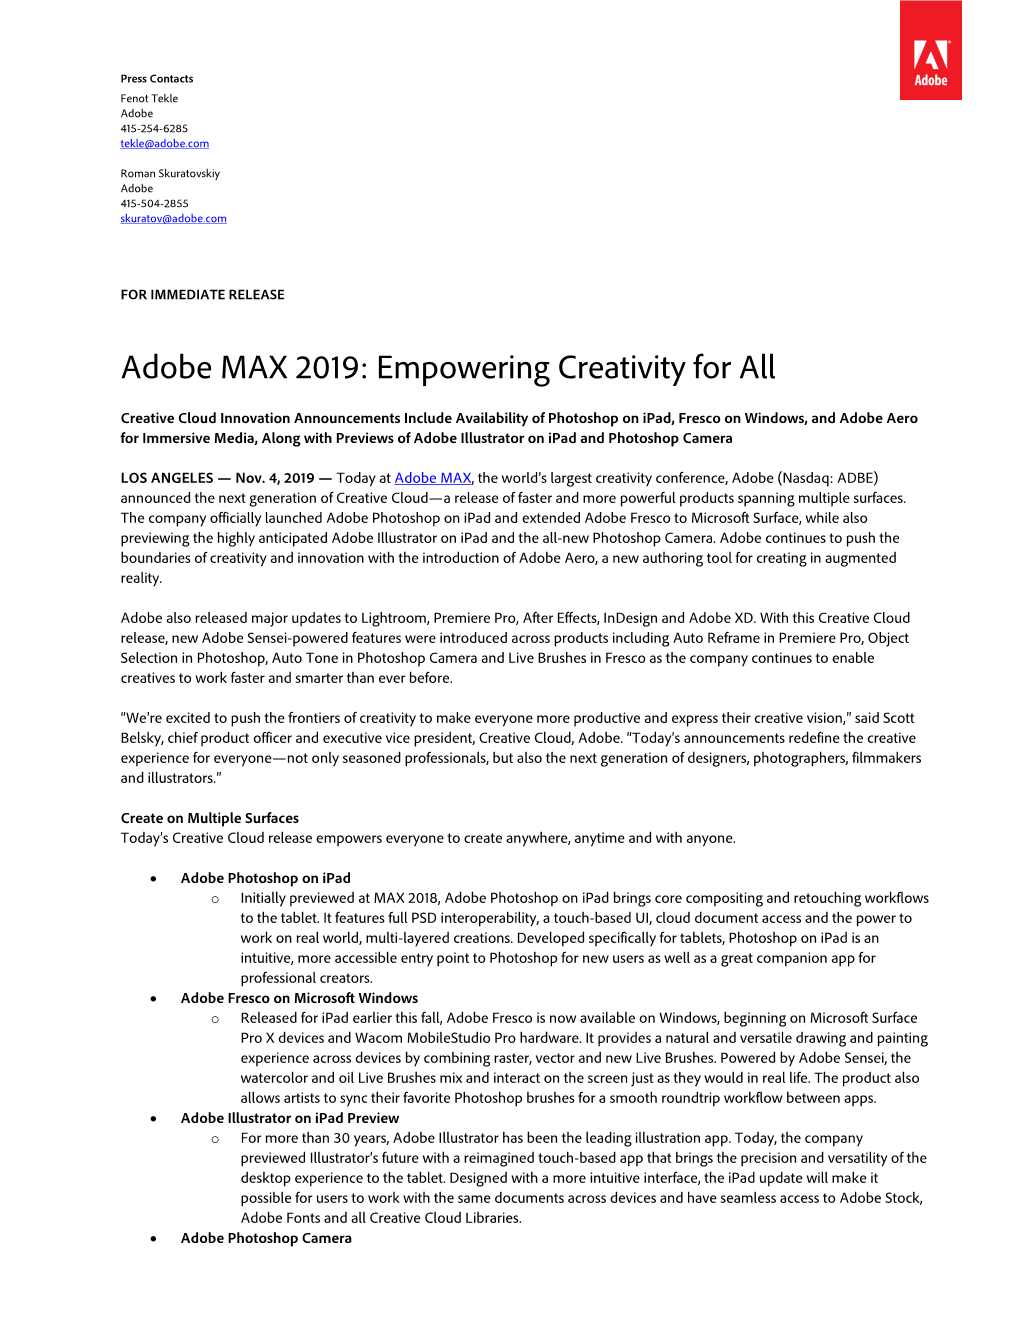 Adobe MAX 2019: Empowering Creativity for All